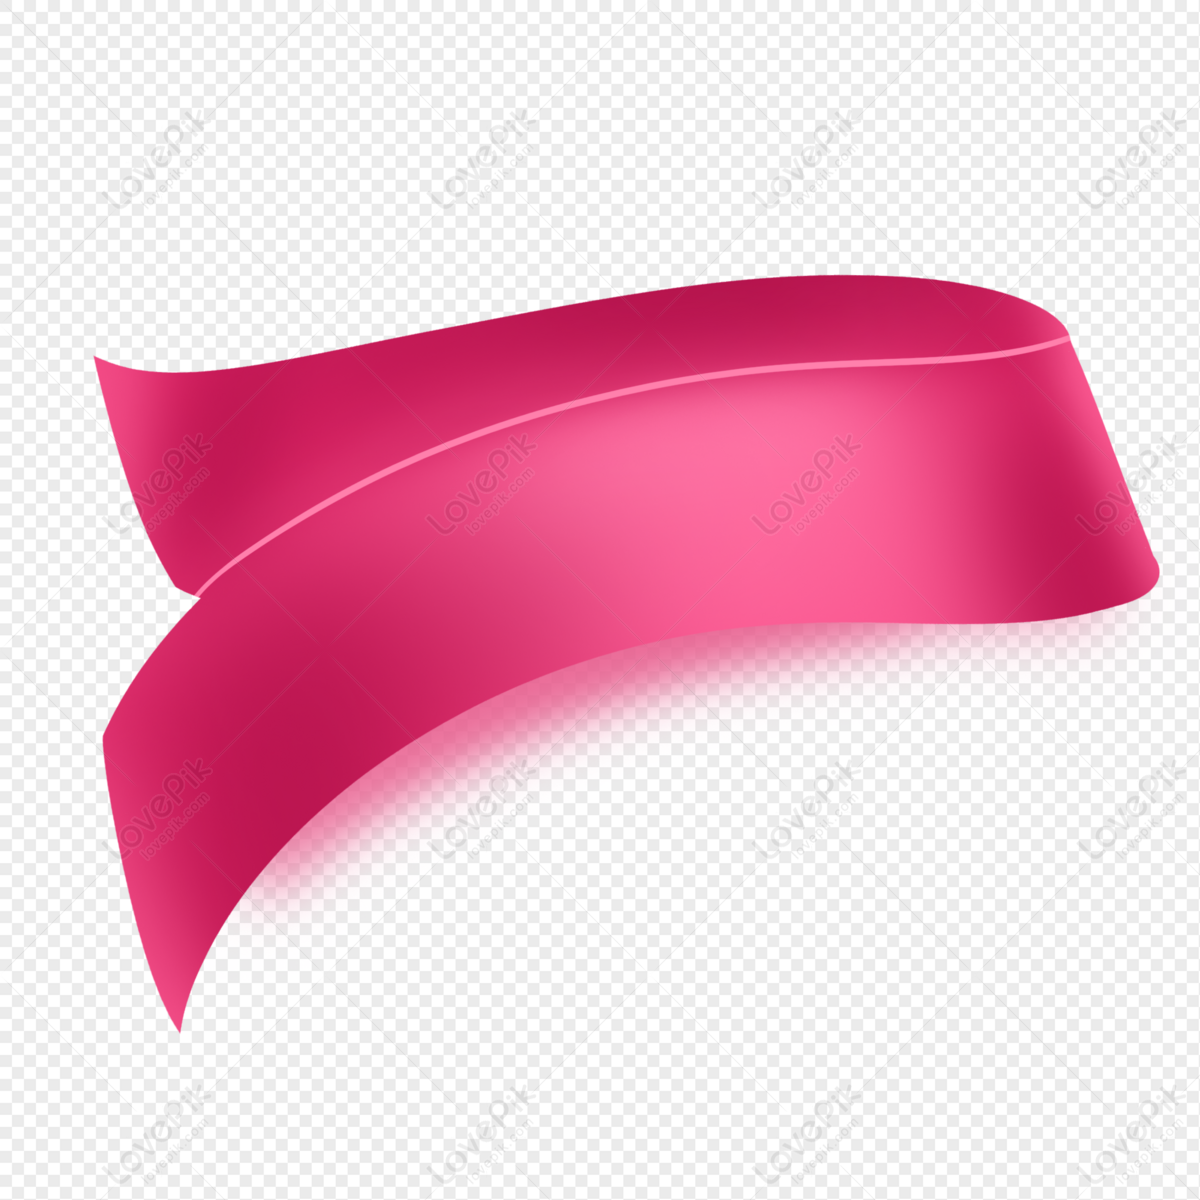 Pink Label, Labels, Pink Tag, Streamers PNG Transparent Image And